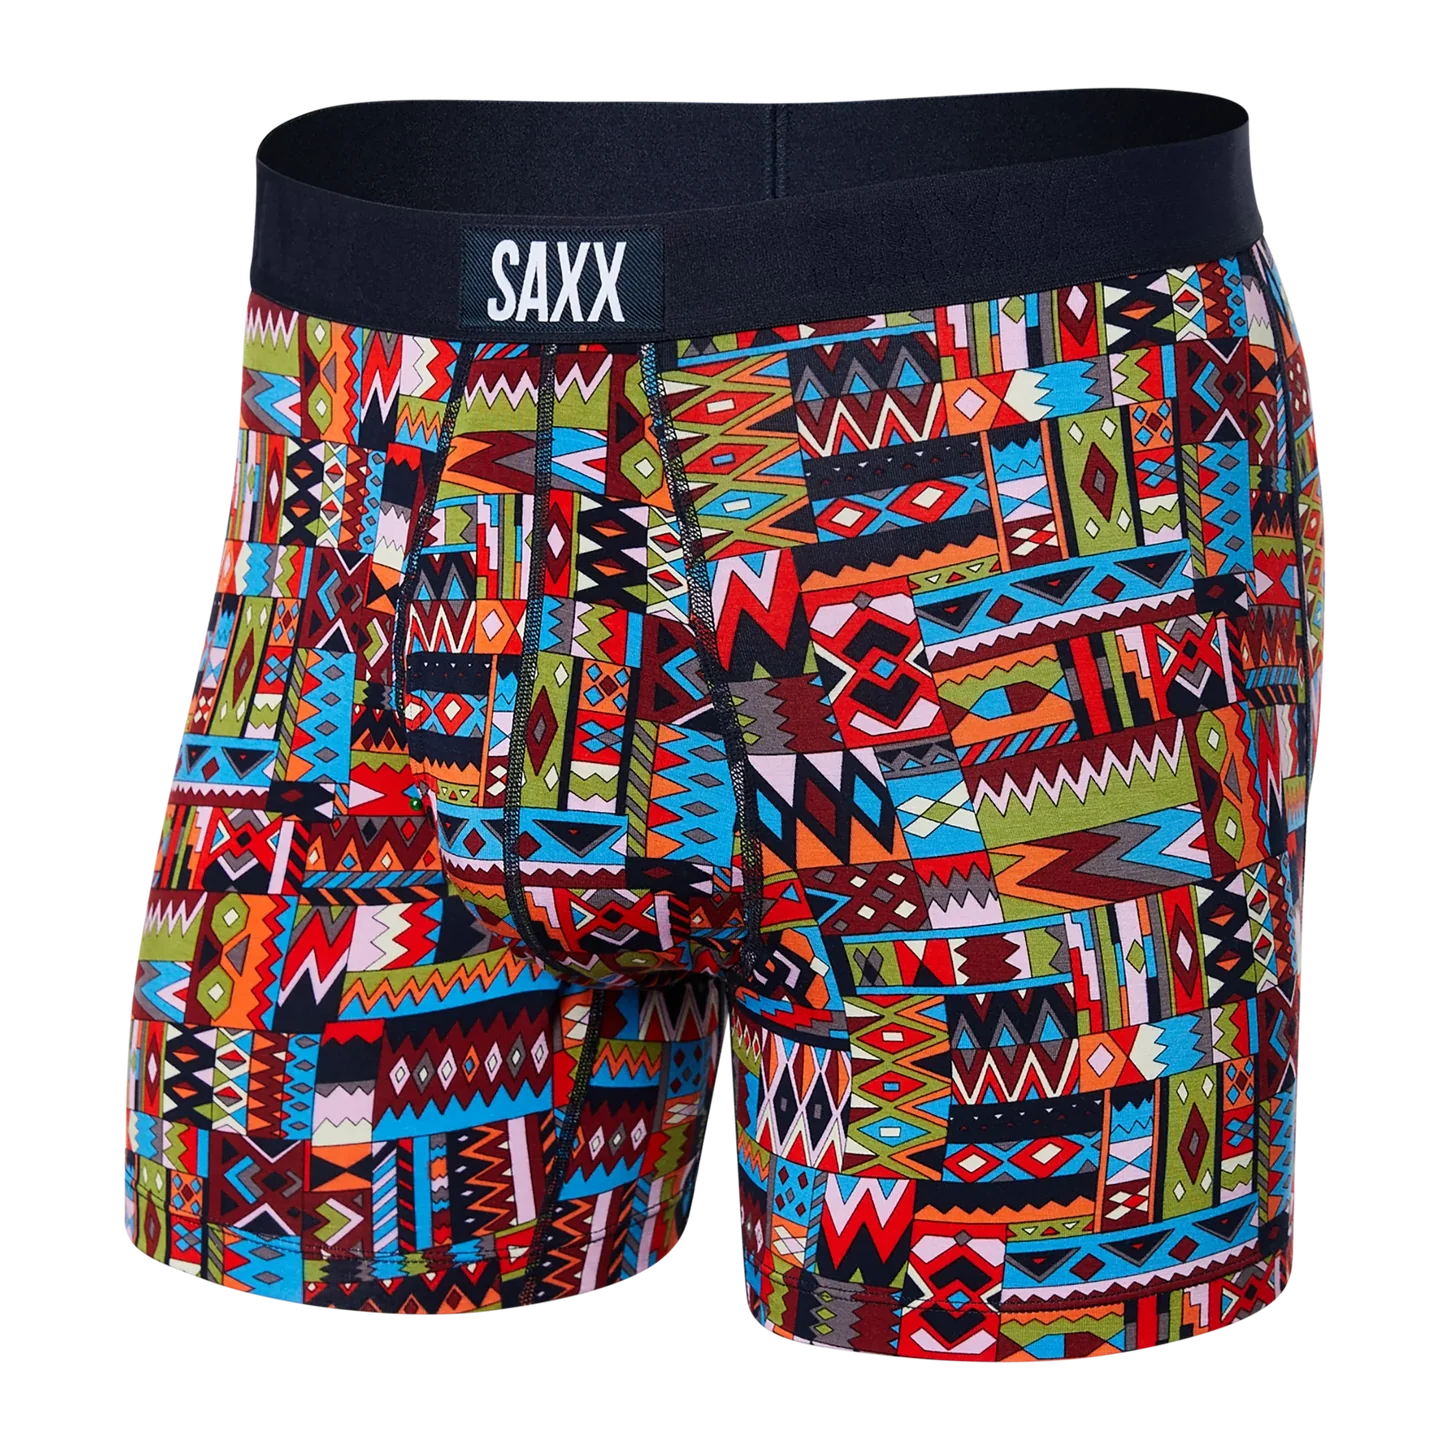 Ultra Boxer Brief (With Fly Opening) Underwear Saxx DMM S 